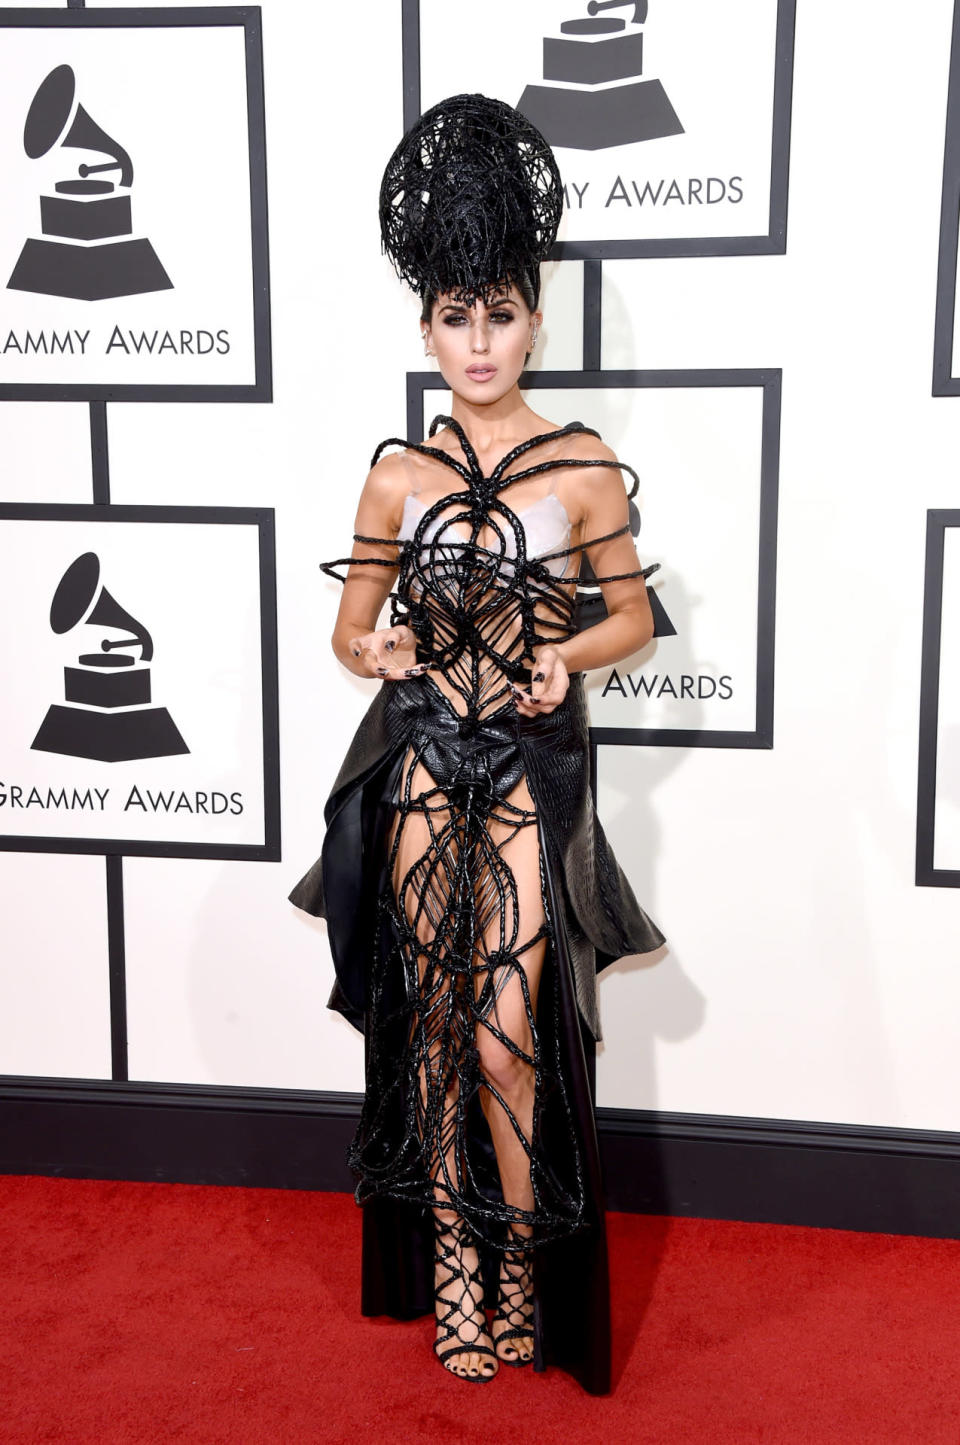 Outrageous: Z LaLa wearing a fascinator with a cage dress at the 58th Grammy Awards at Staples Center in Los Angeles, California, on February 15, 2016.  